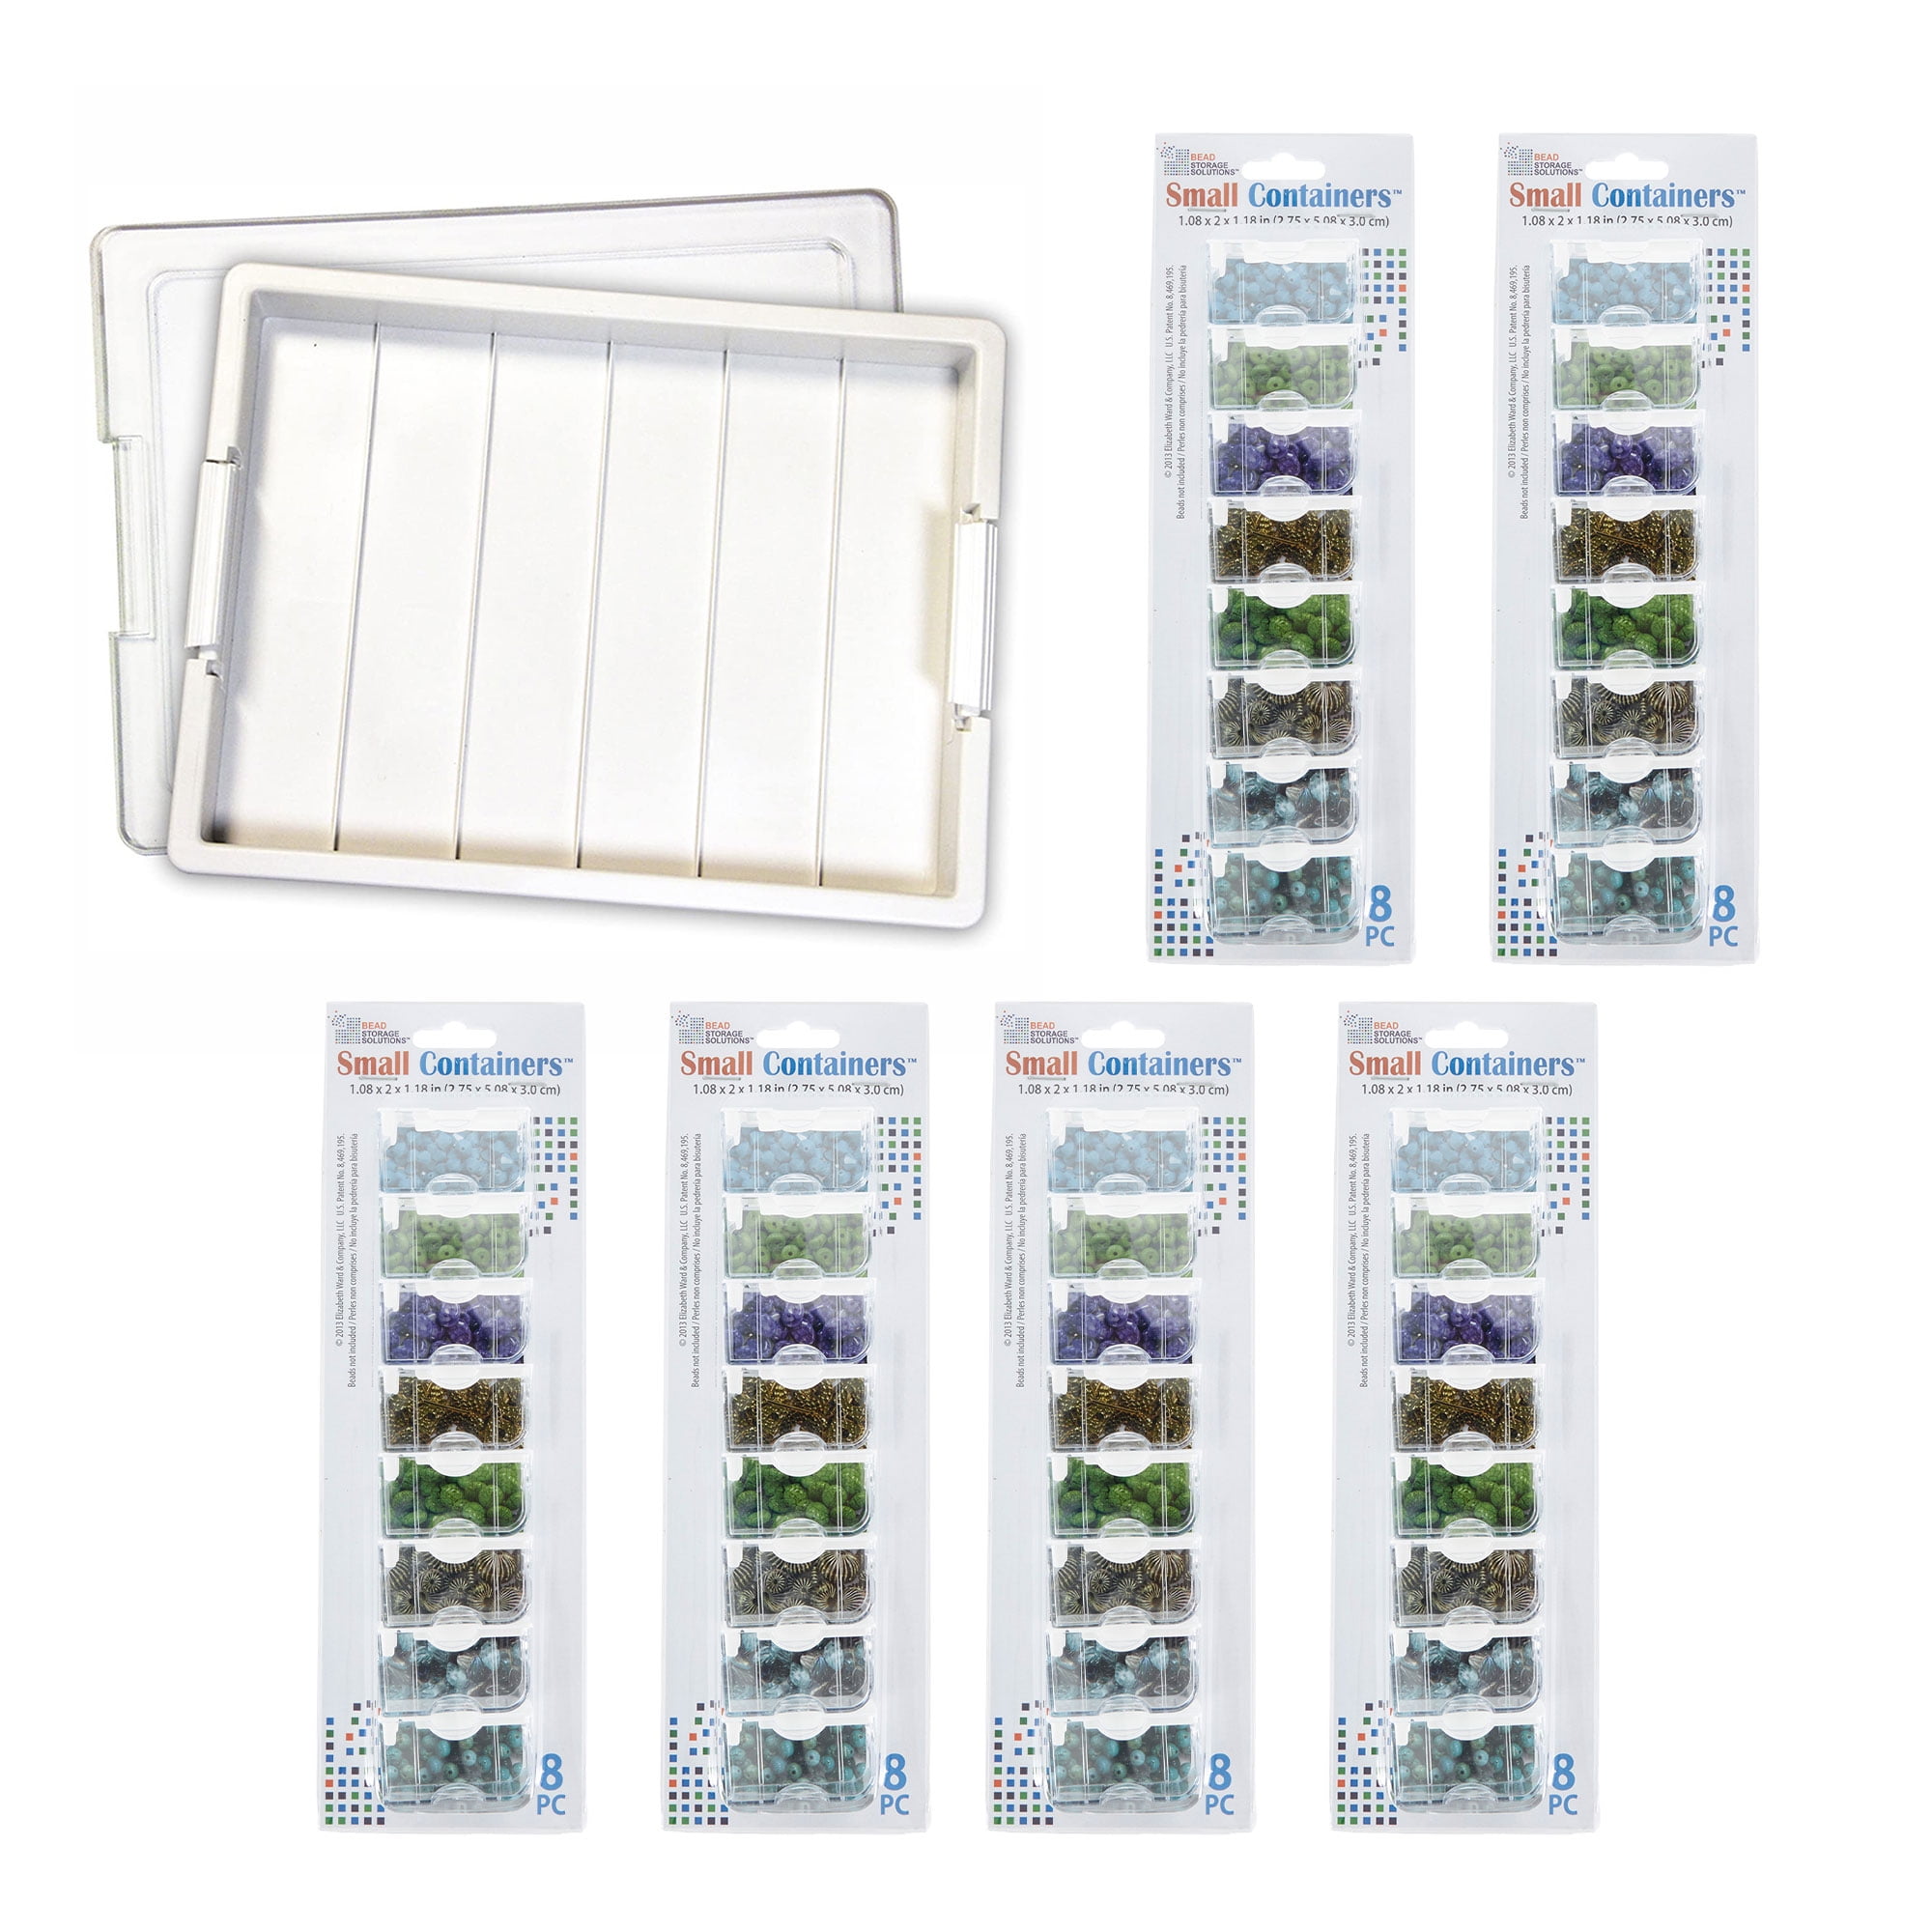  48 Pieces Mixed Sizes Small Plastic Box Empty Mini Clear  Plastic Organizer Rectangular Bead Organizer with Hinged Lids for Small  Items, Jewelry and Art Craft Projects Organizing : Arts, Crafts 